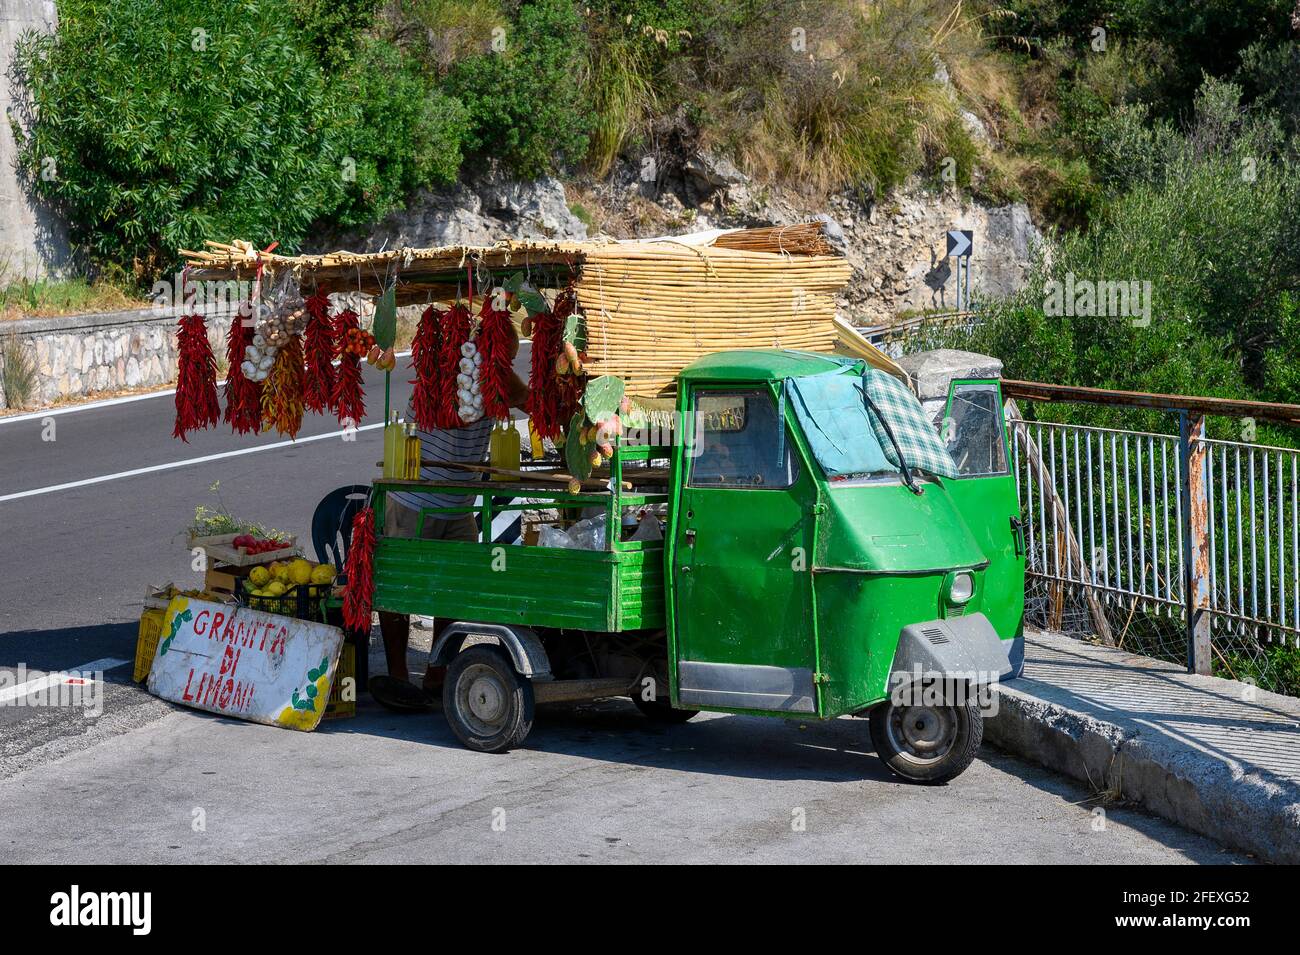 A small mobile sales stand on the roadside in Italy with various types of fruit and vegetables. Stock Photo